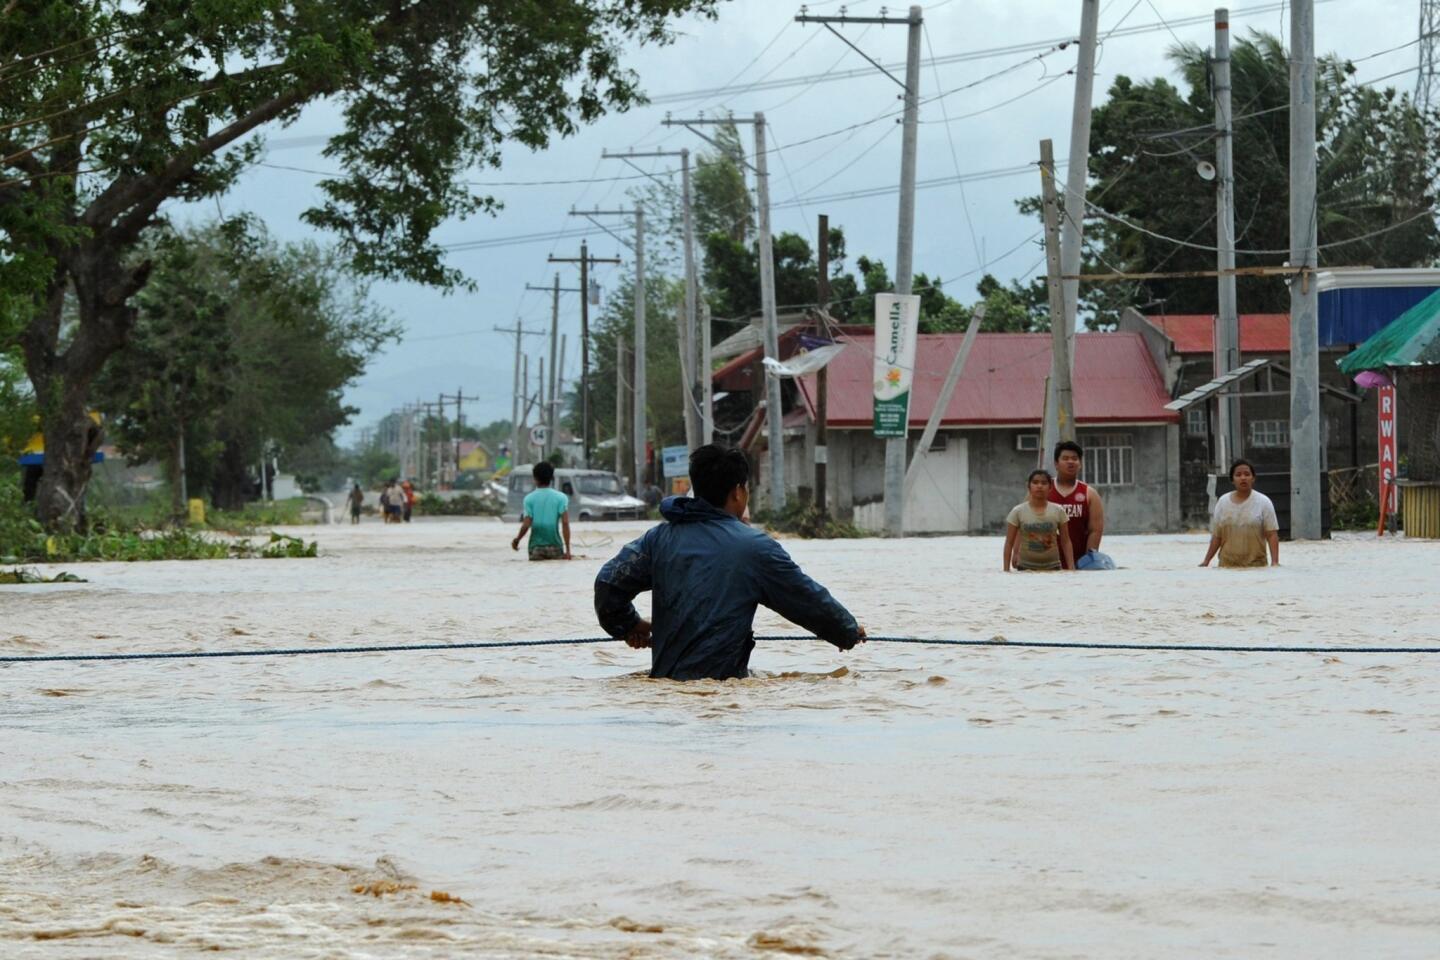 A resident holds onto a rope as he negotiates a flood along a submerged highway in Santa Rosa, Philippines, on Oct. 19, 2015, a day after typhoon Koppu hit Aurora province.